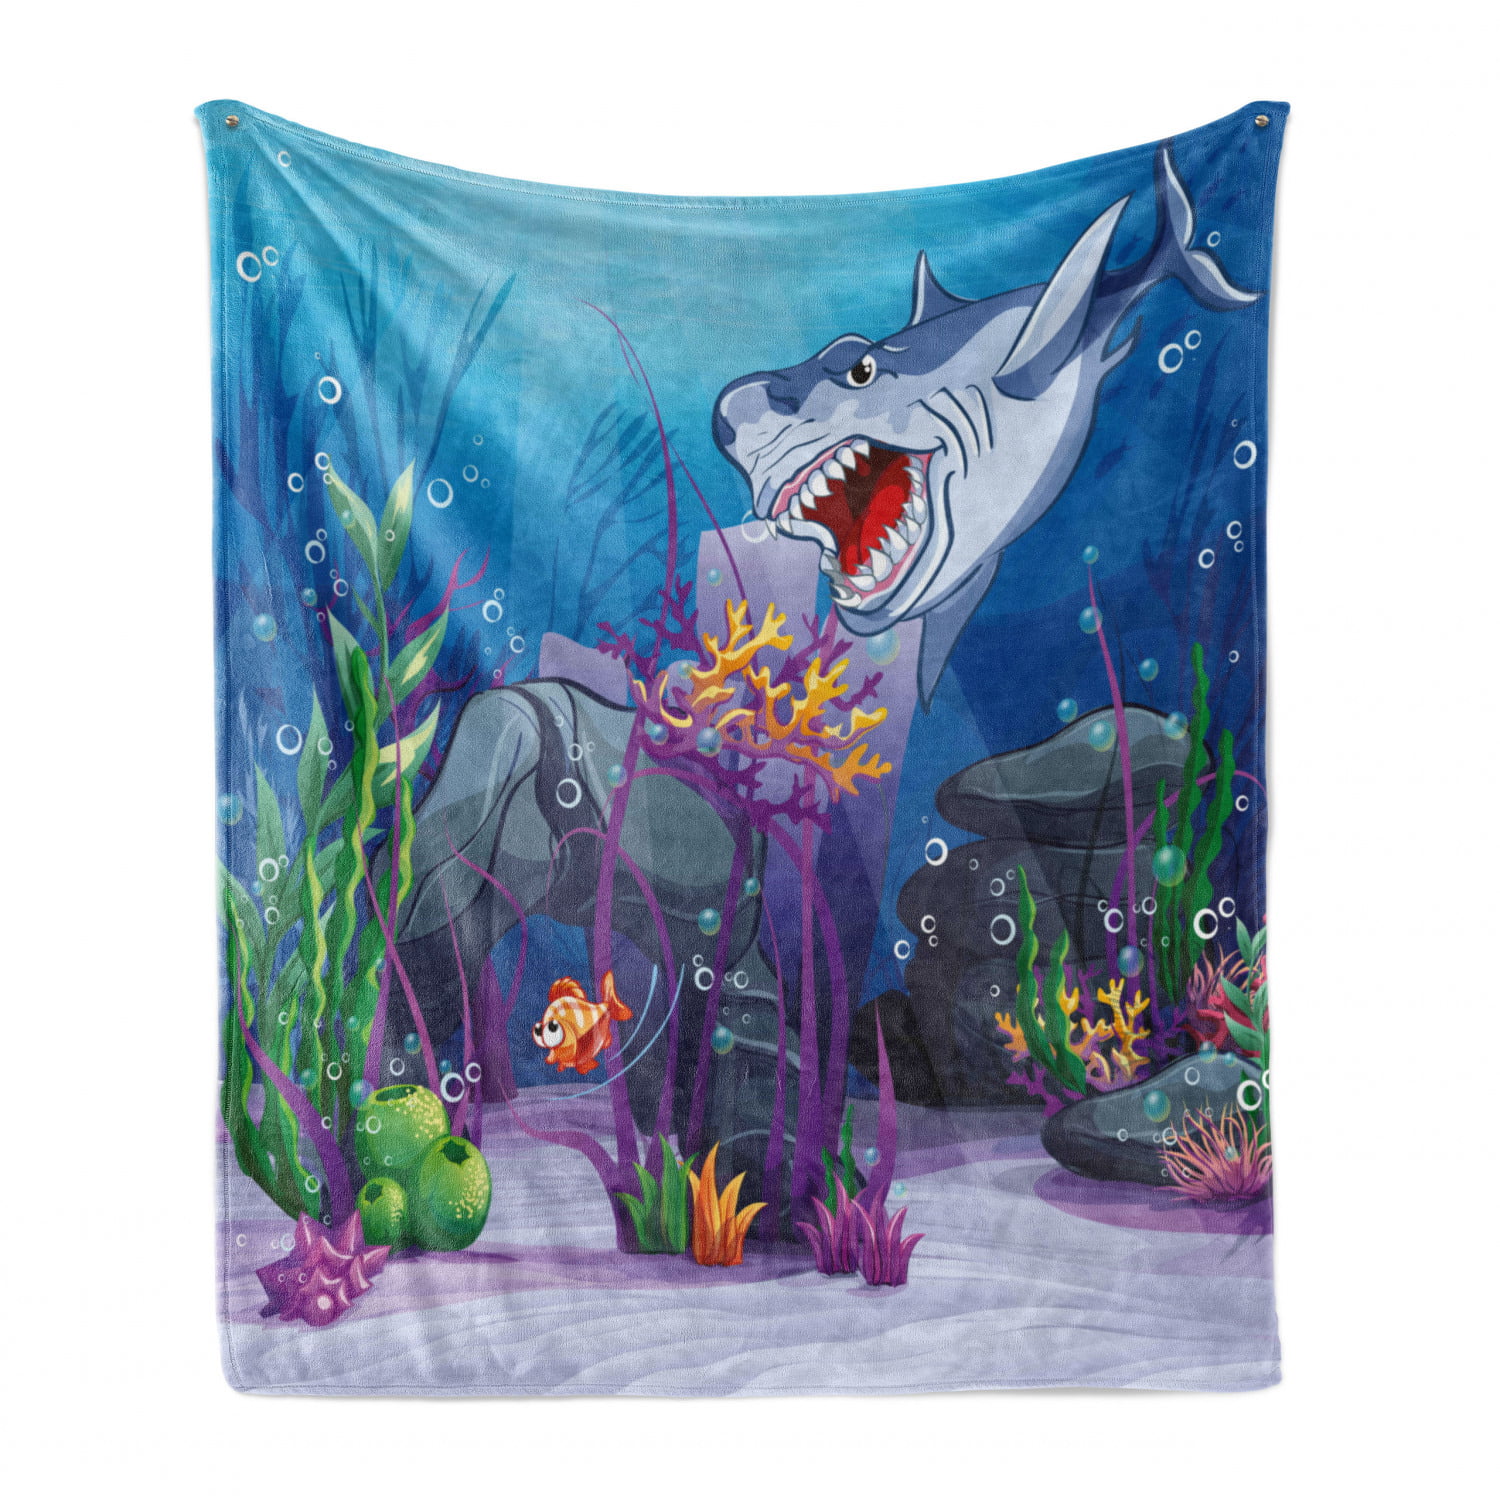 Multicolor Cozy Plush for Indoor and Outdoor Use 50 x 60 Lunarable Turtle Soft Flannel Fleece Throw Blanket Colorful Abstract Designs with Hawaiian Elements Hibiscus Marine Reptiles Flowers 